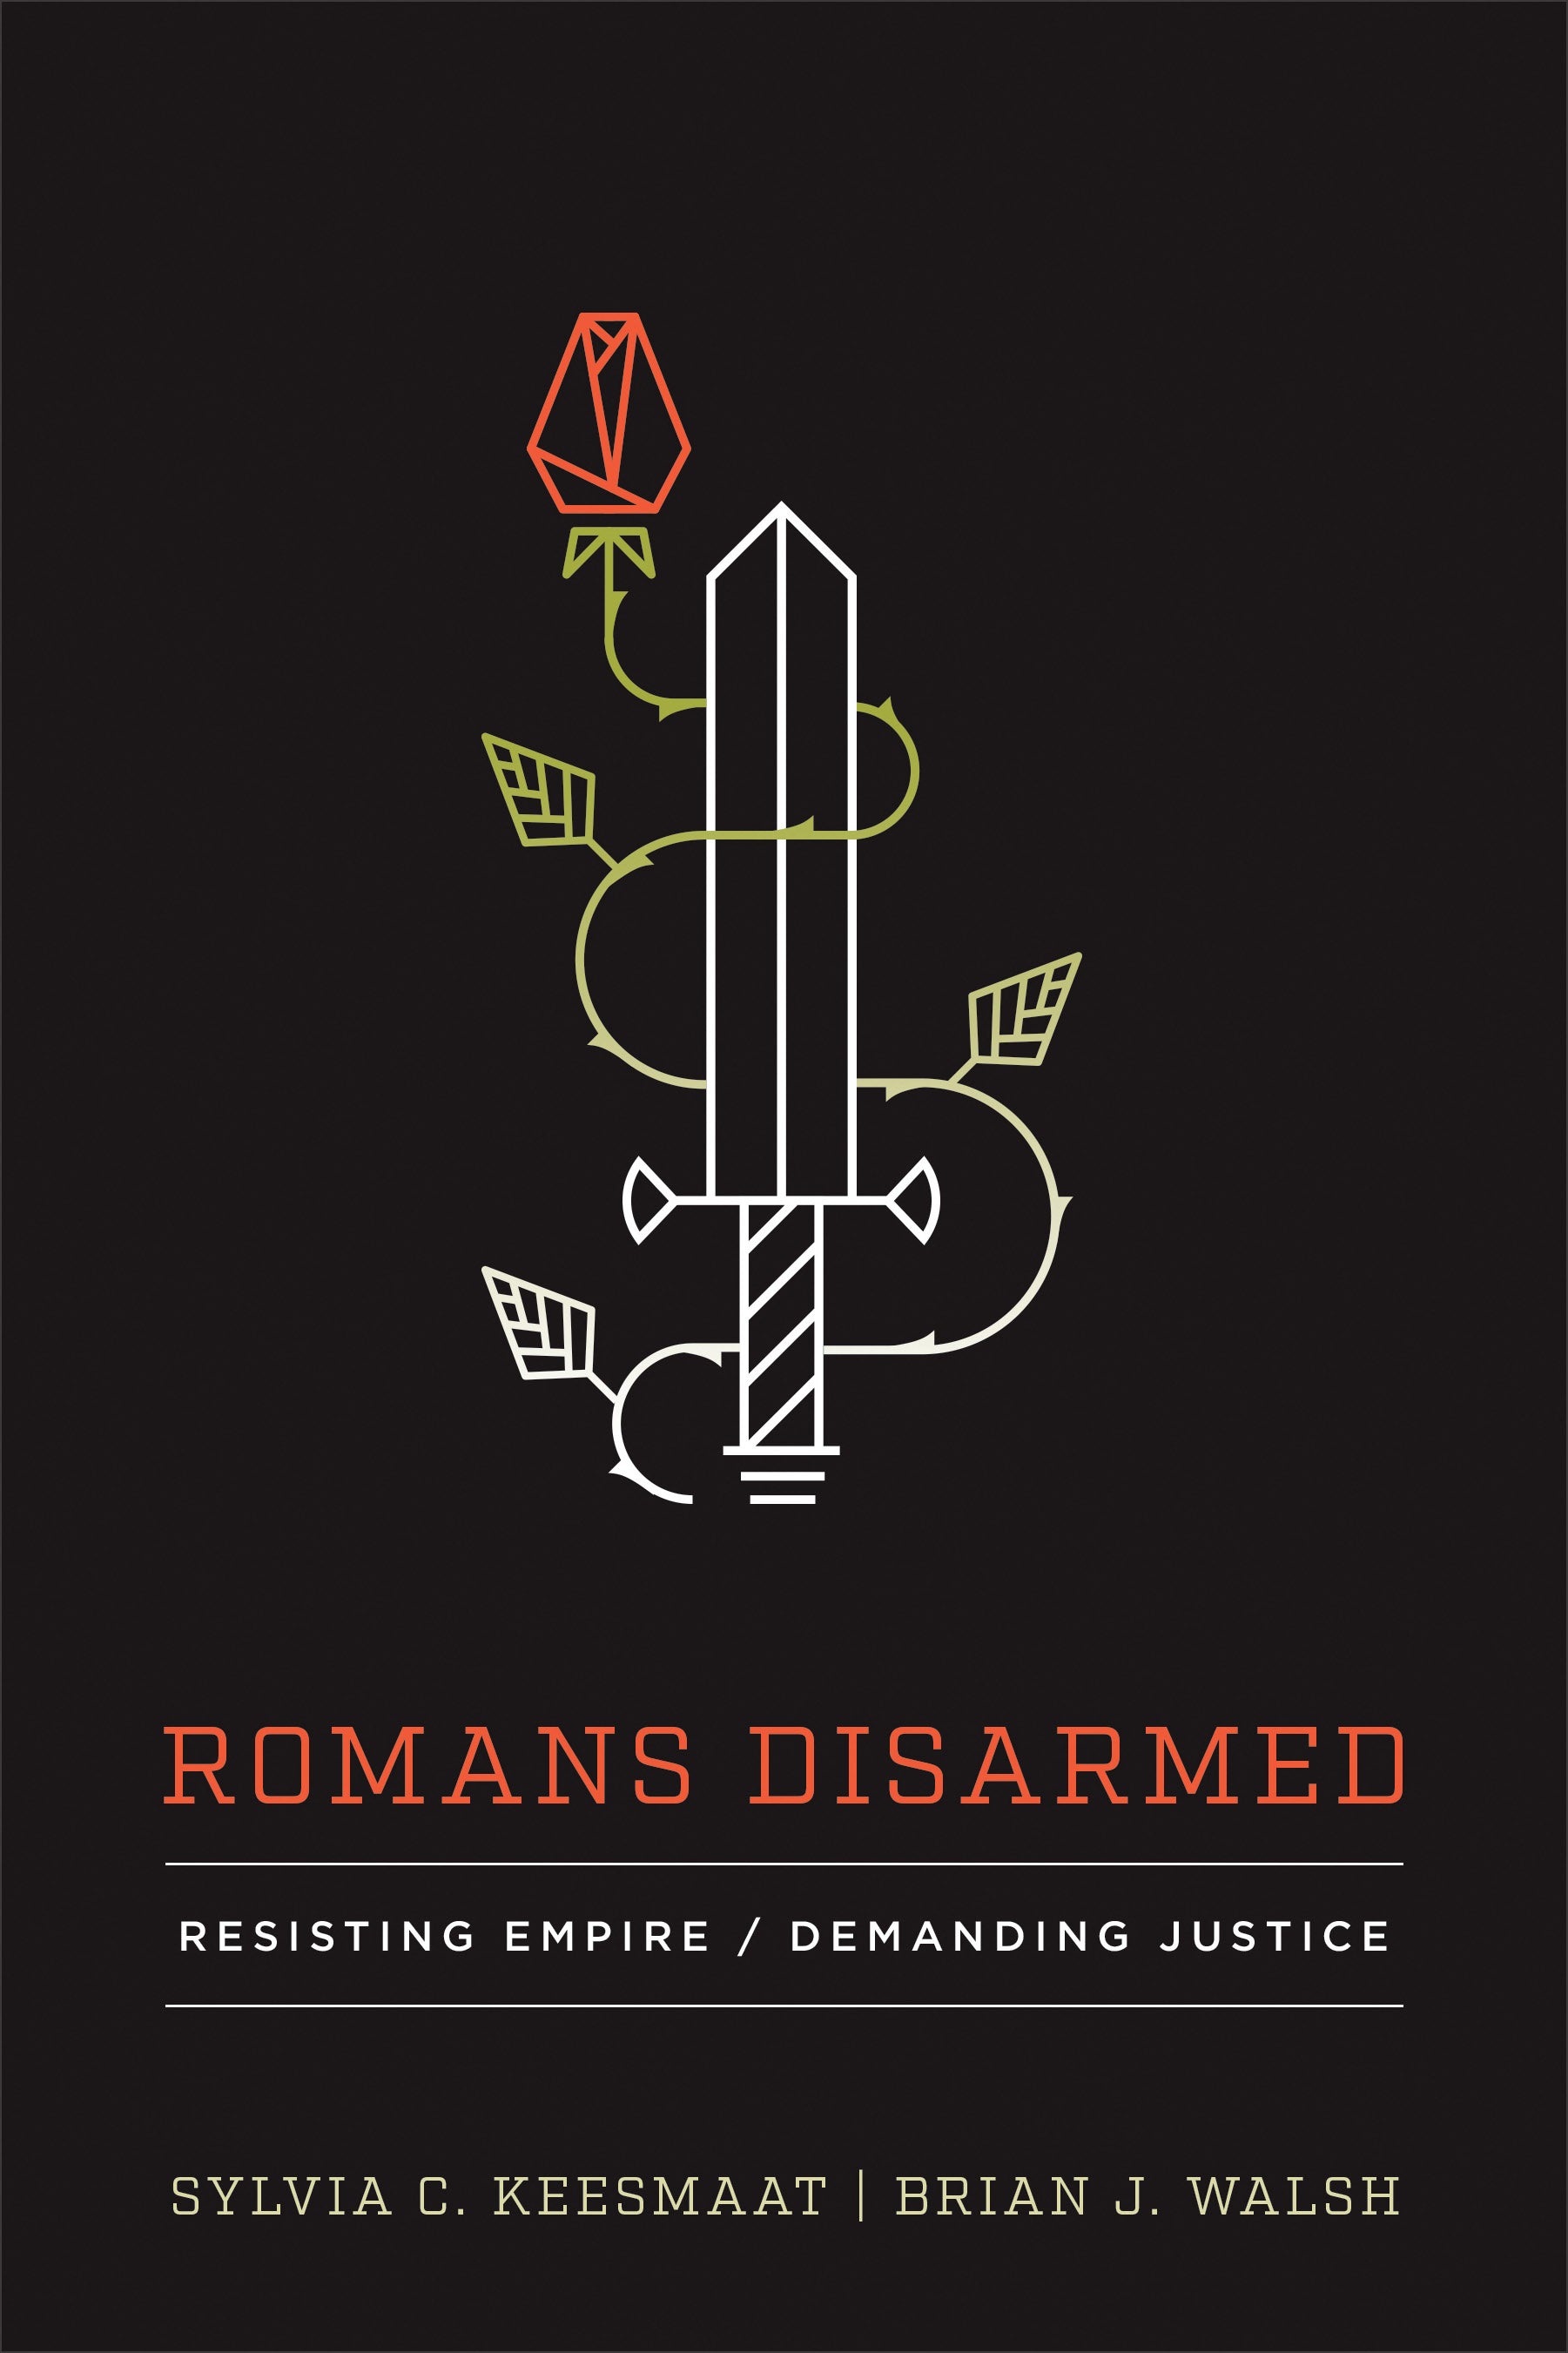 Image of Romans Disarmed other